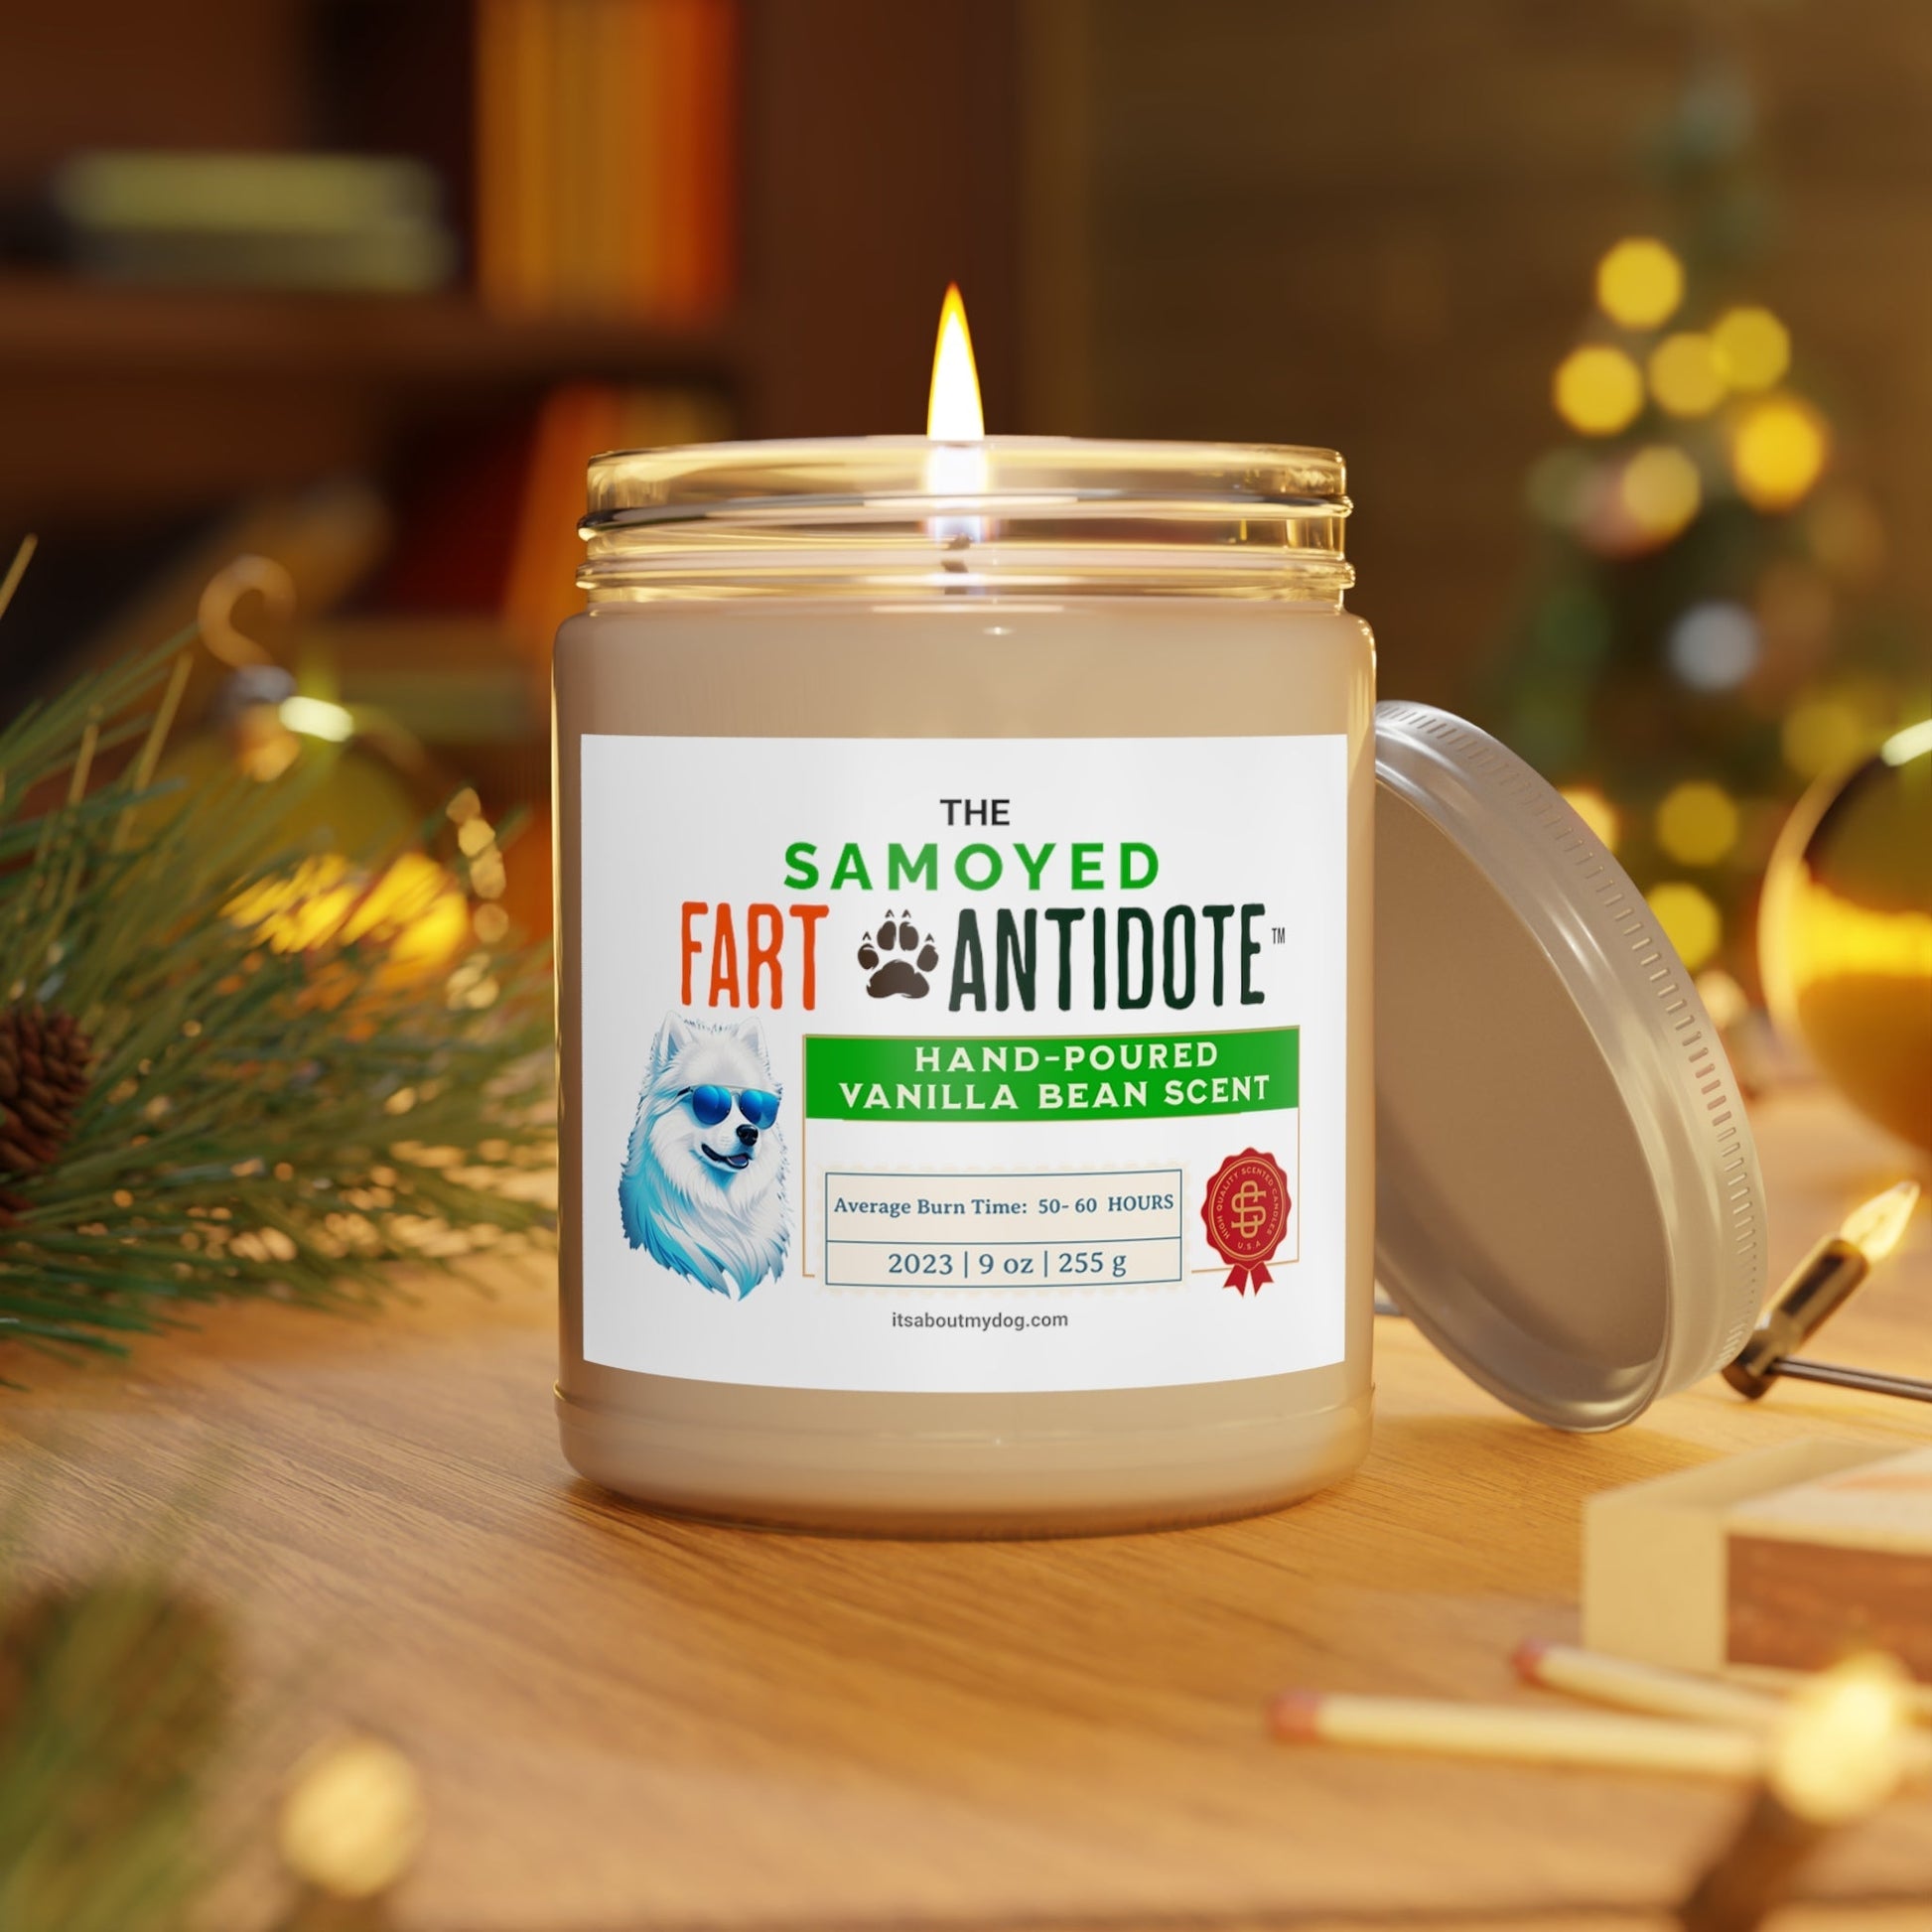 Samoyed-Dog Fart Antidote Scented Candles,9oz , Samoyed Gifts27.99-(FREE Delivery) Shop now at itsaboutmydog.com, Assembled in the USA, dog mom gift basket, gifts from dog to mom, samoyed gifts, samoyed gifts dog lovers